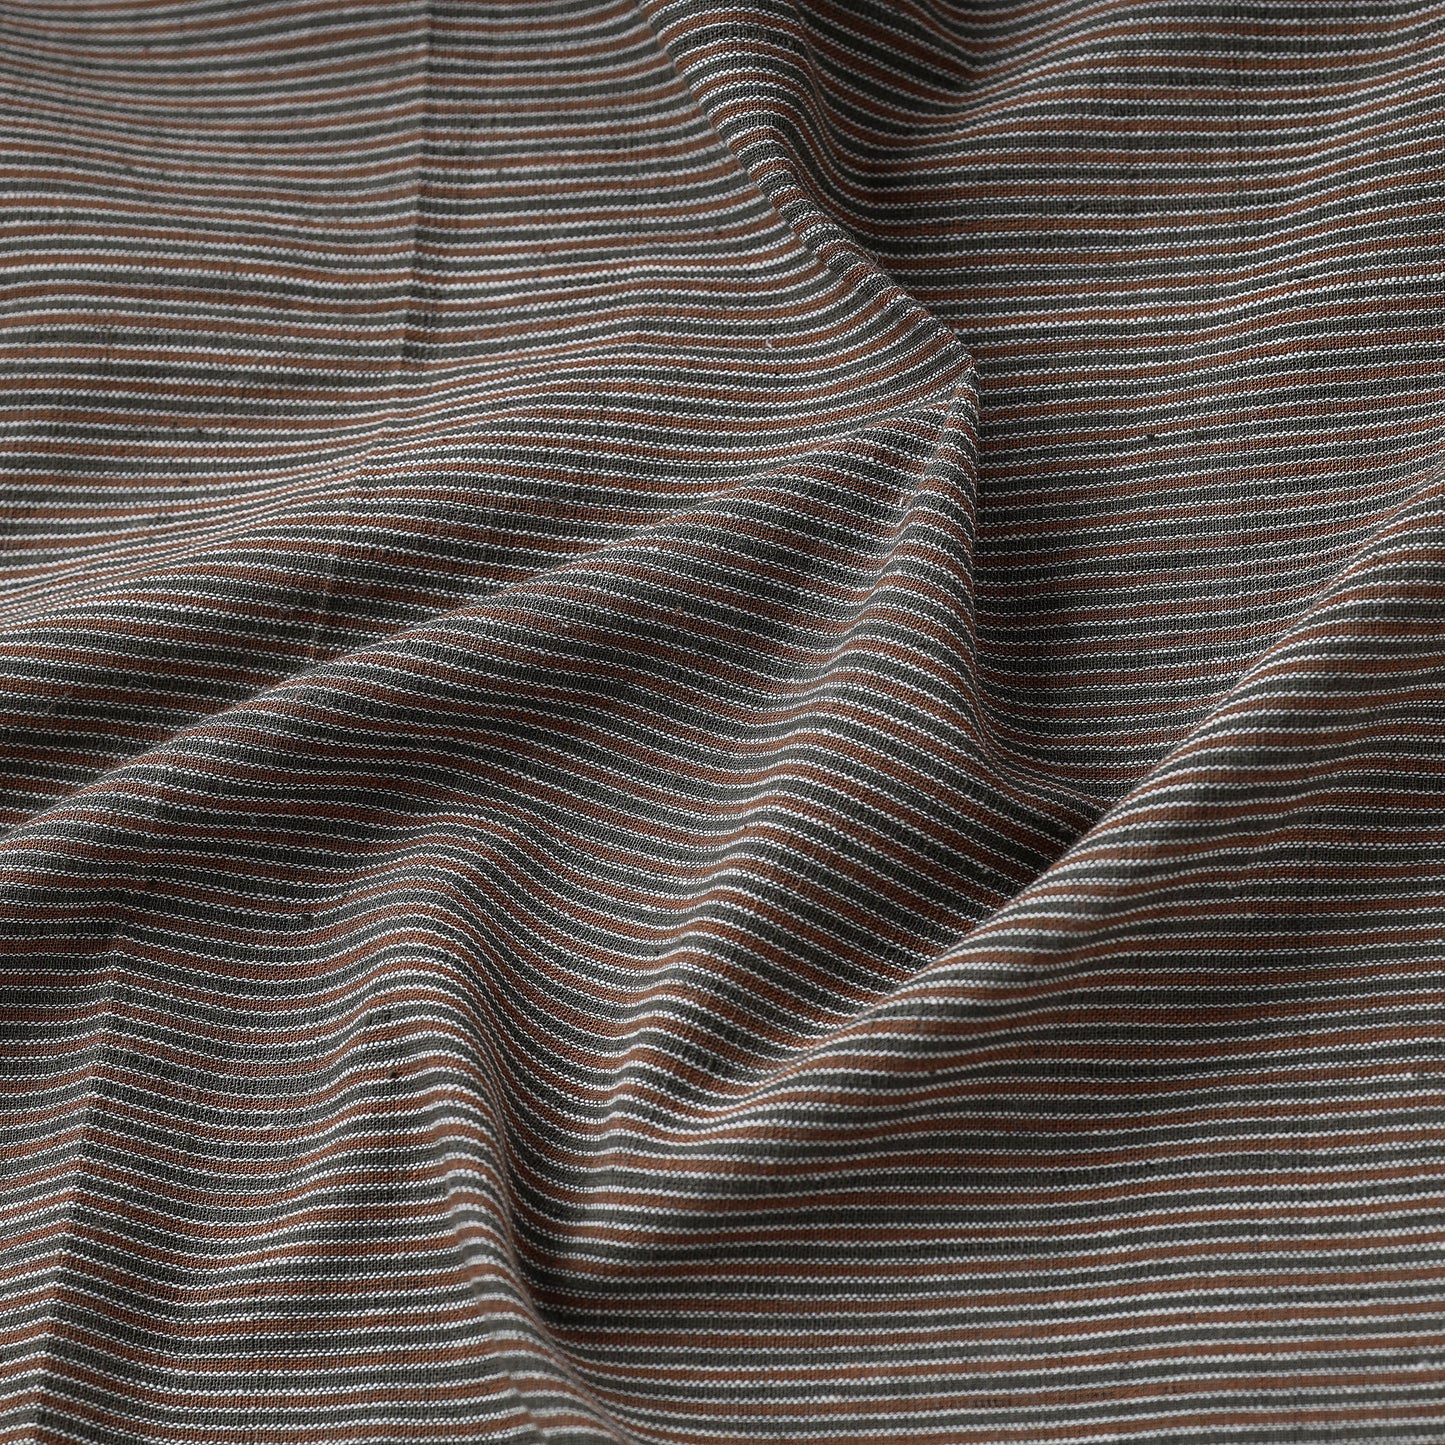 Brown - Malkha Pure Handloom Cotton Natural Dyed Fabric